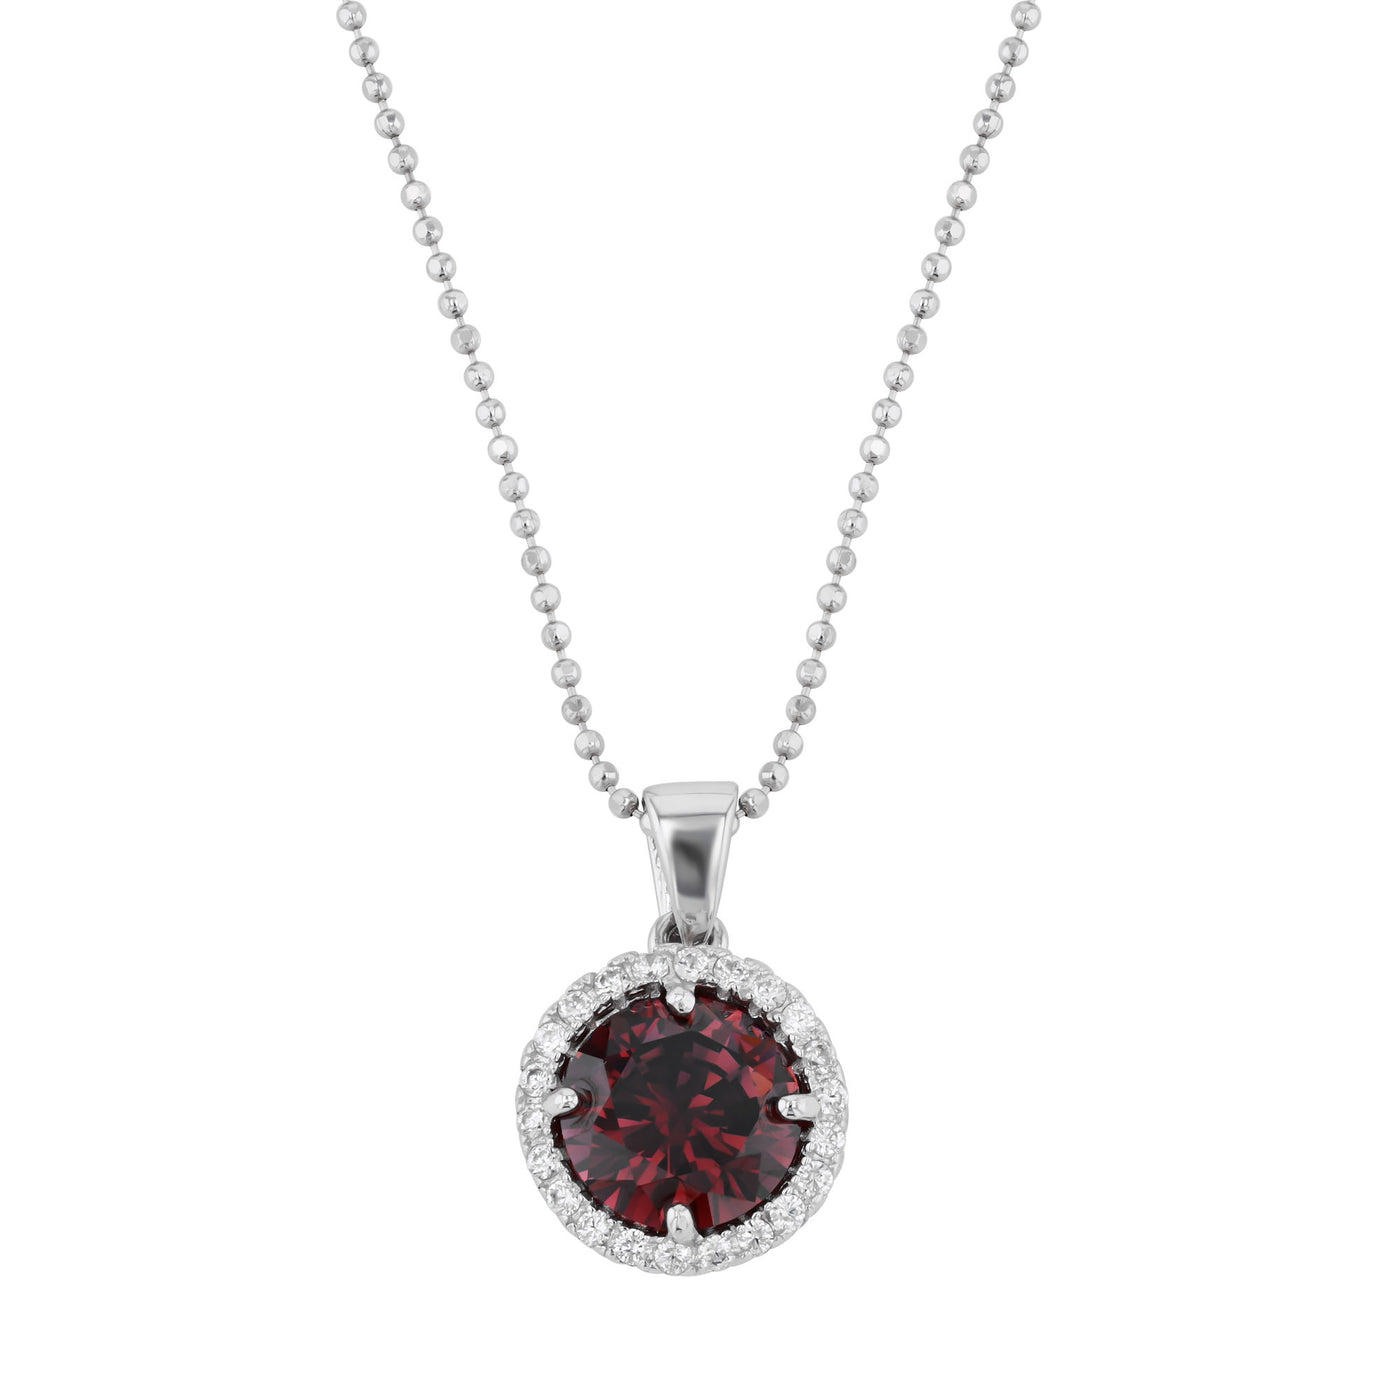 Rebecca Sloane Silver Circle with Faceted Smoky Topaz CZ Pendant